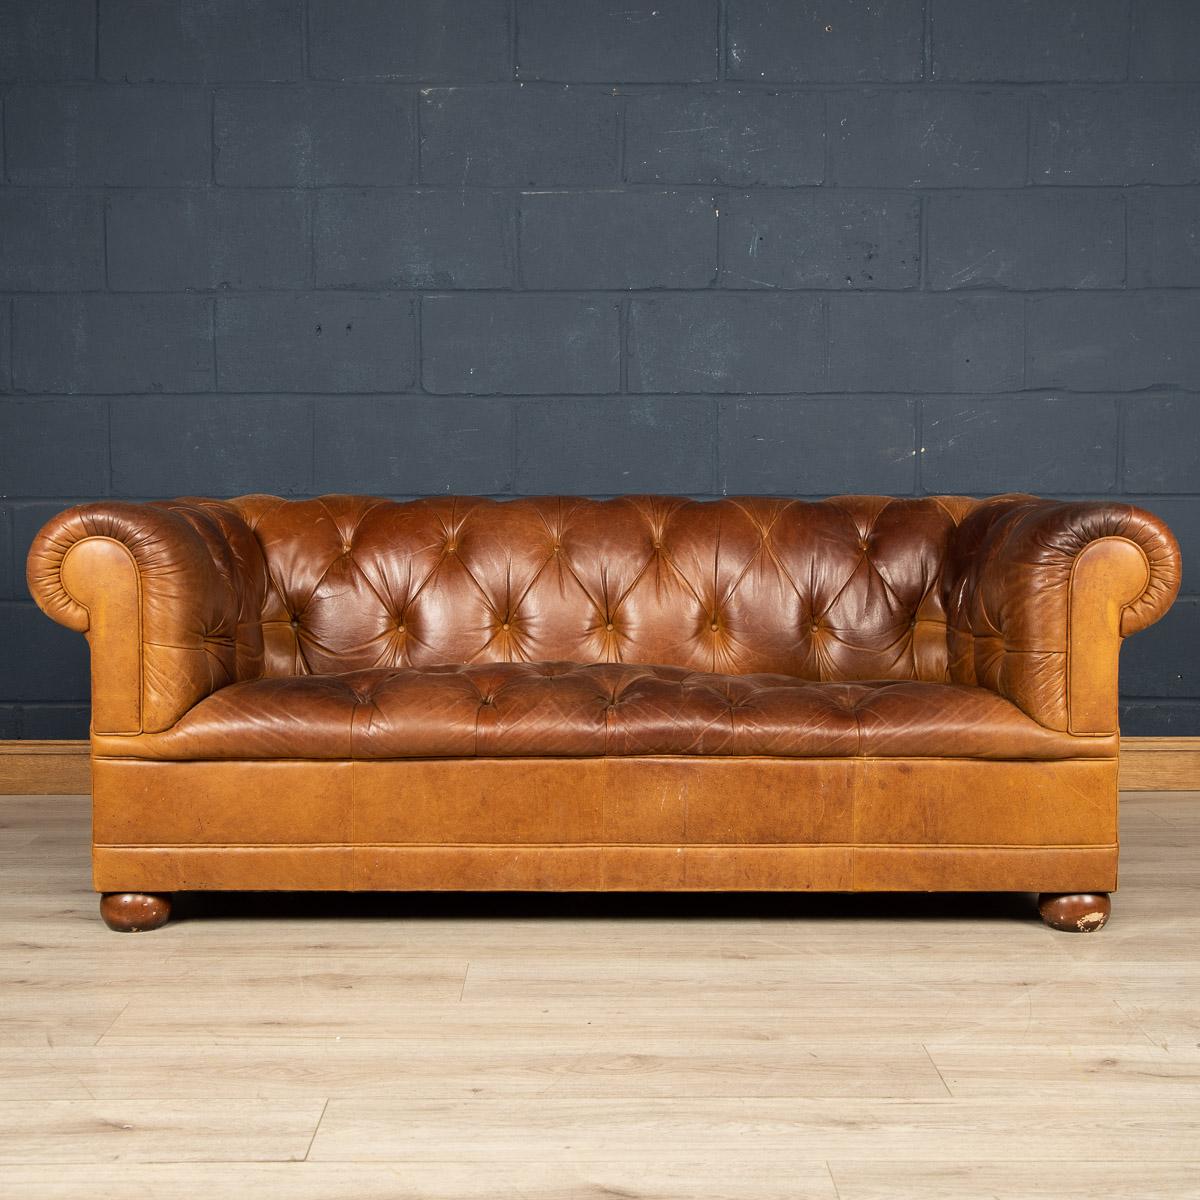 A superb leather Chesterfield sofa retailed by Laura Ashley around the latter part of the 20th century. One of the most elegant models with button down seating, this is a fashionable item of furniture capable of uplifting the interior space of any